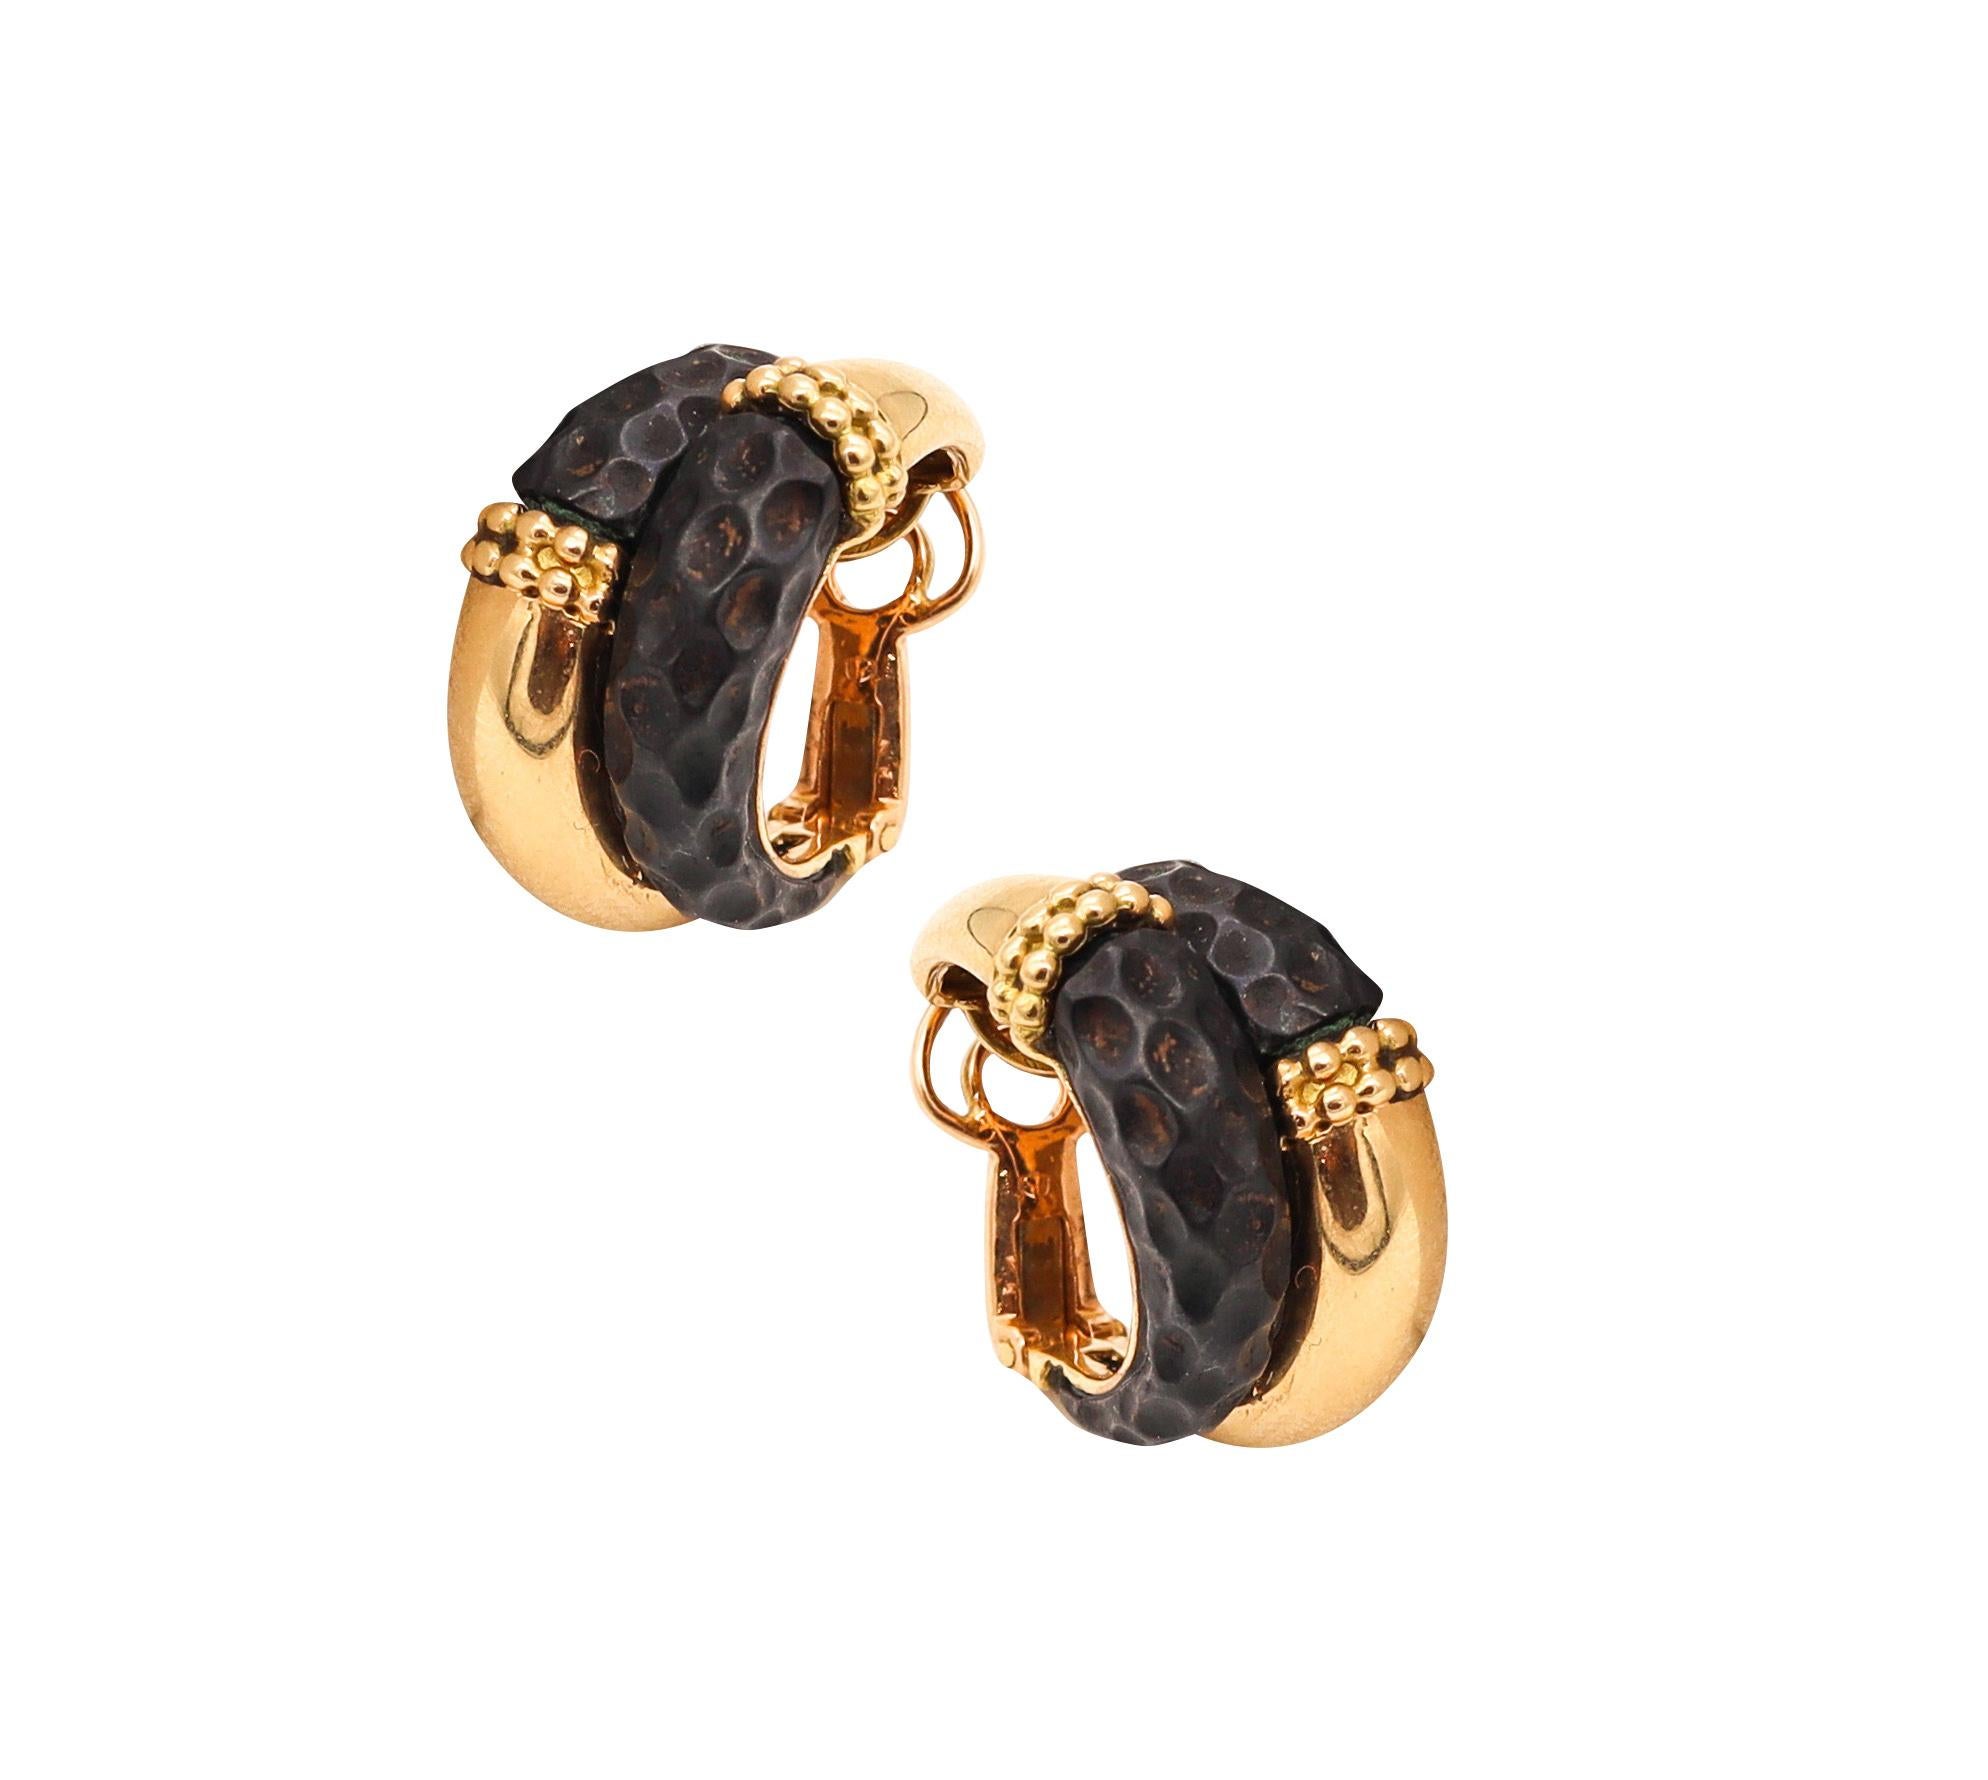 Modernist Boucheron 1970 Paris Modernism Clip Earrings In 18Kt Gold with Patinated Airain